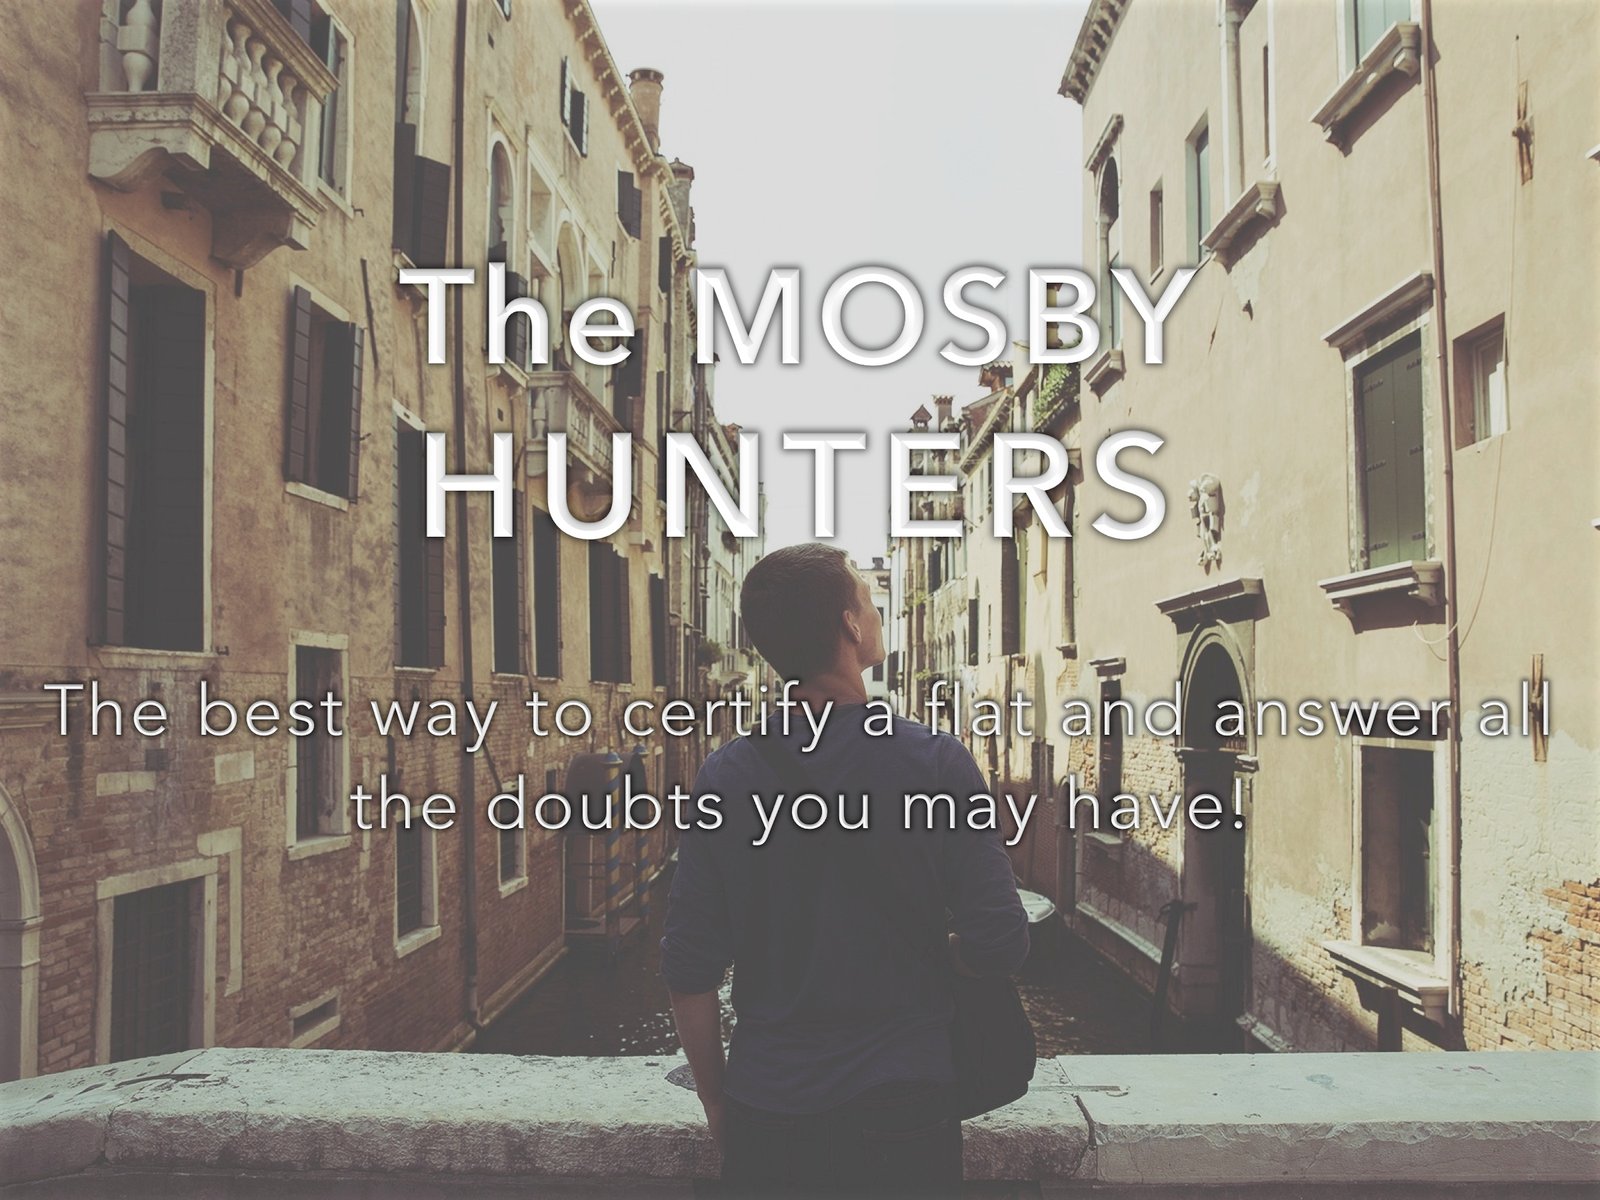 The Mosby Hunters